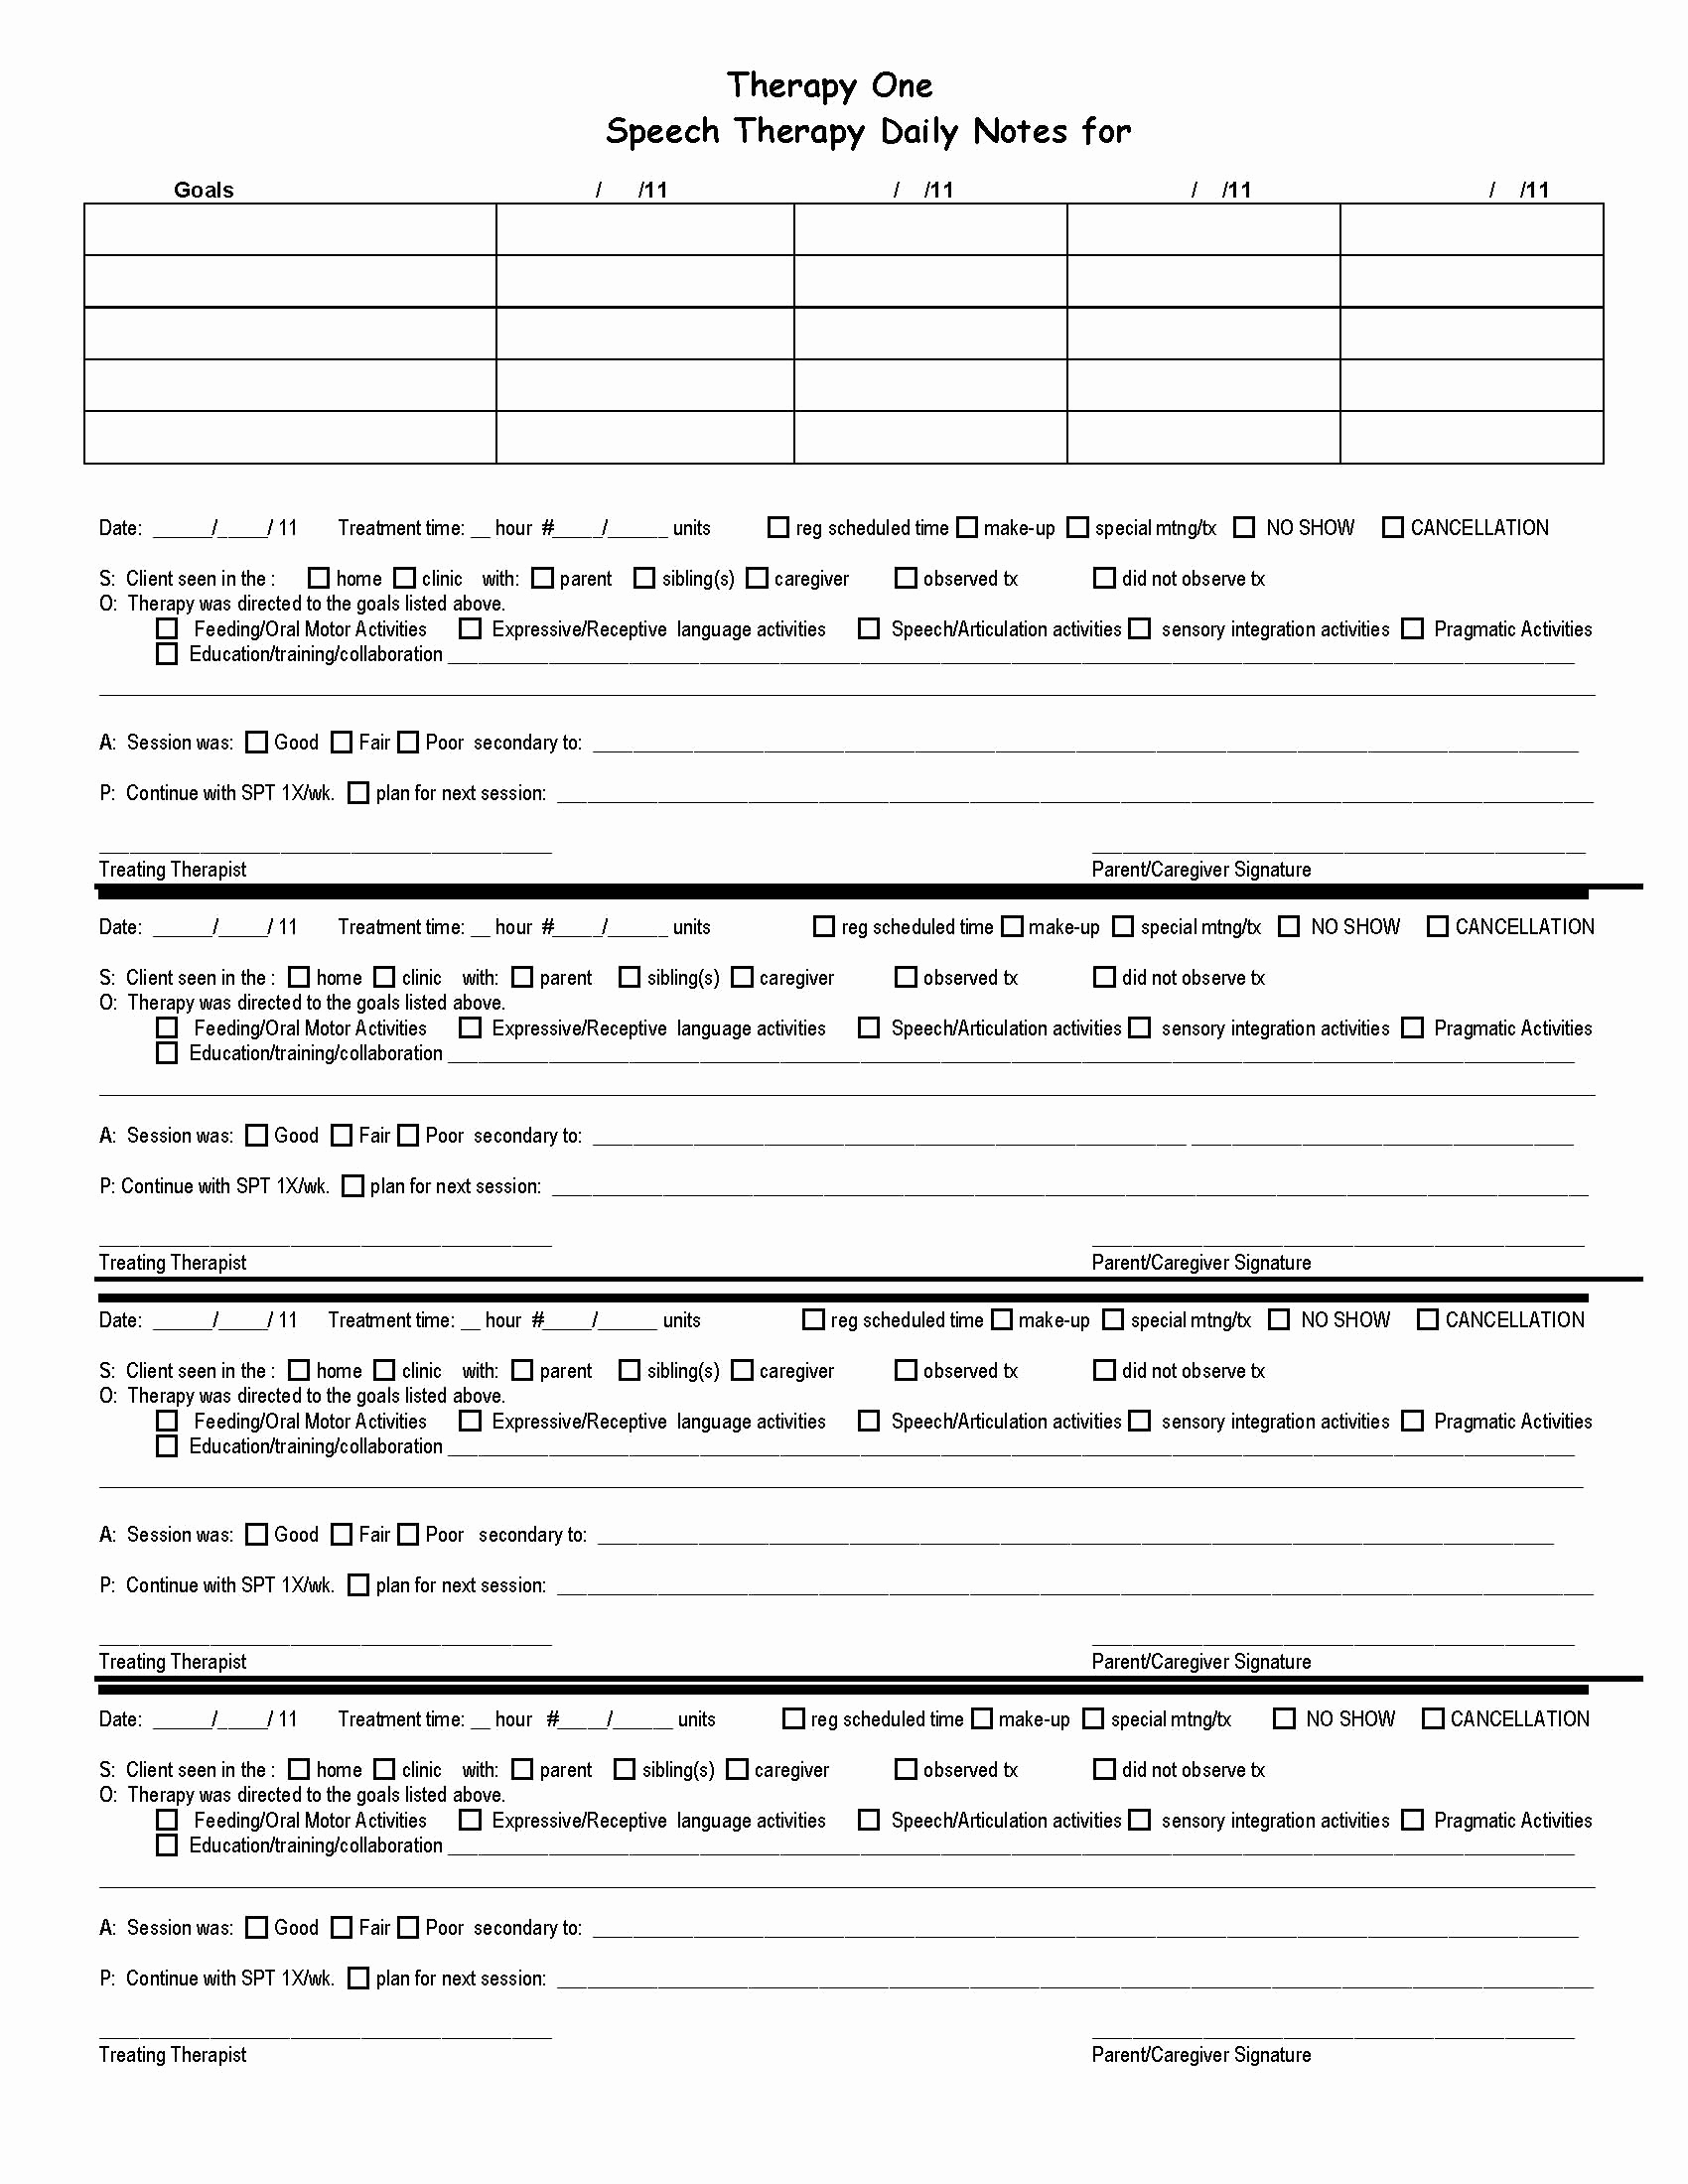 Soap Notes Speech therapy Template Best Of therapy form Redesign before and after